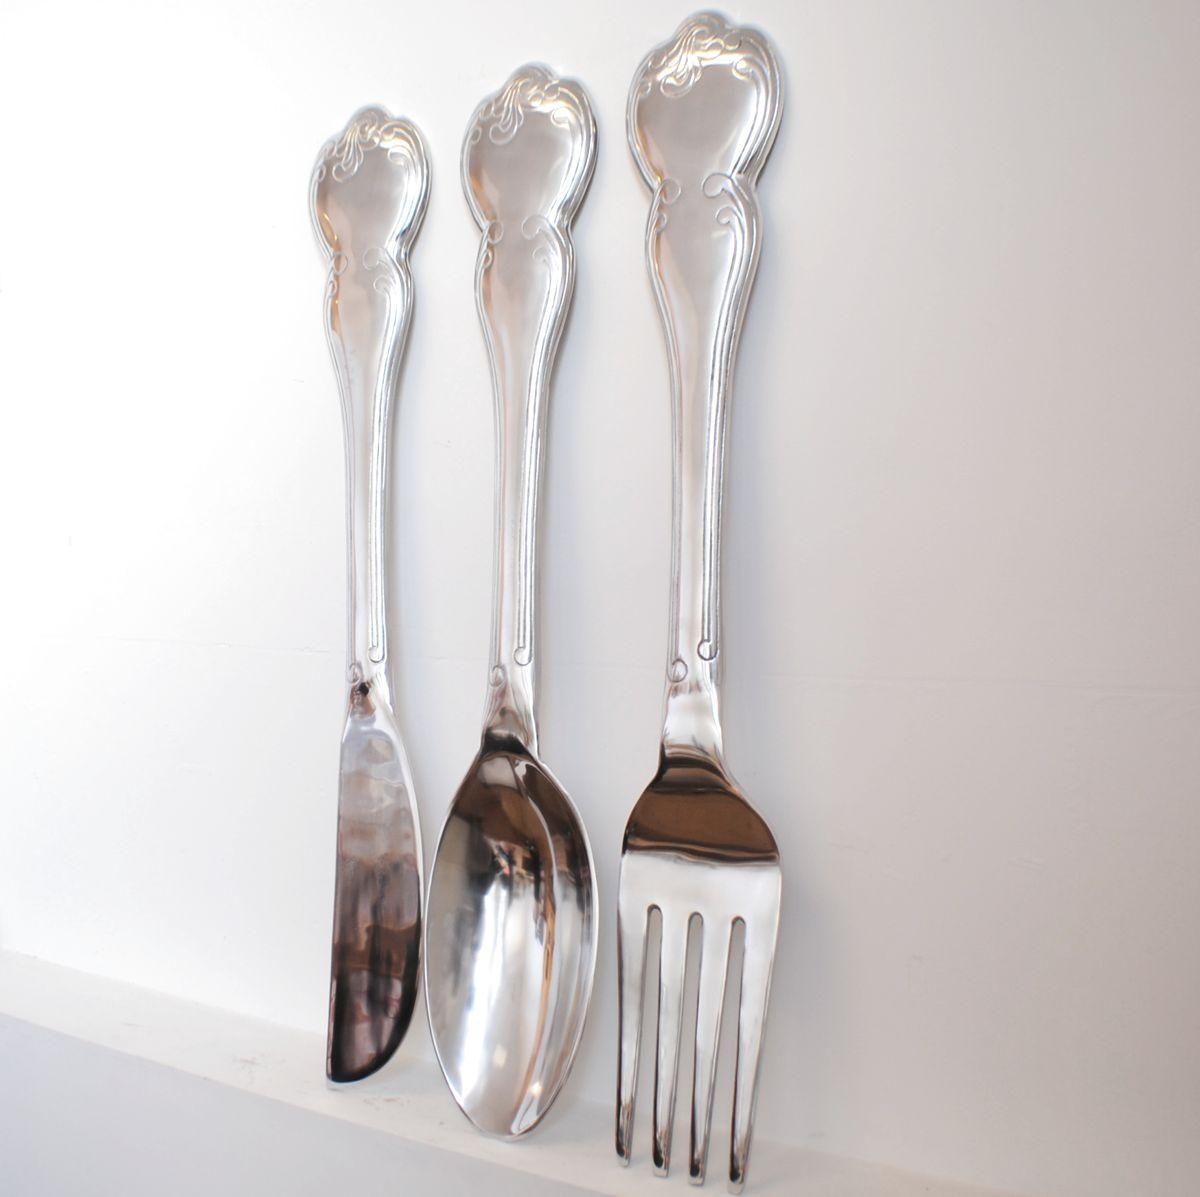 Wall Decor: Spoon Wall Decor Images (View 5 of 20)